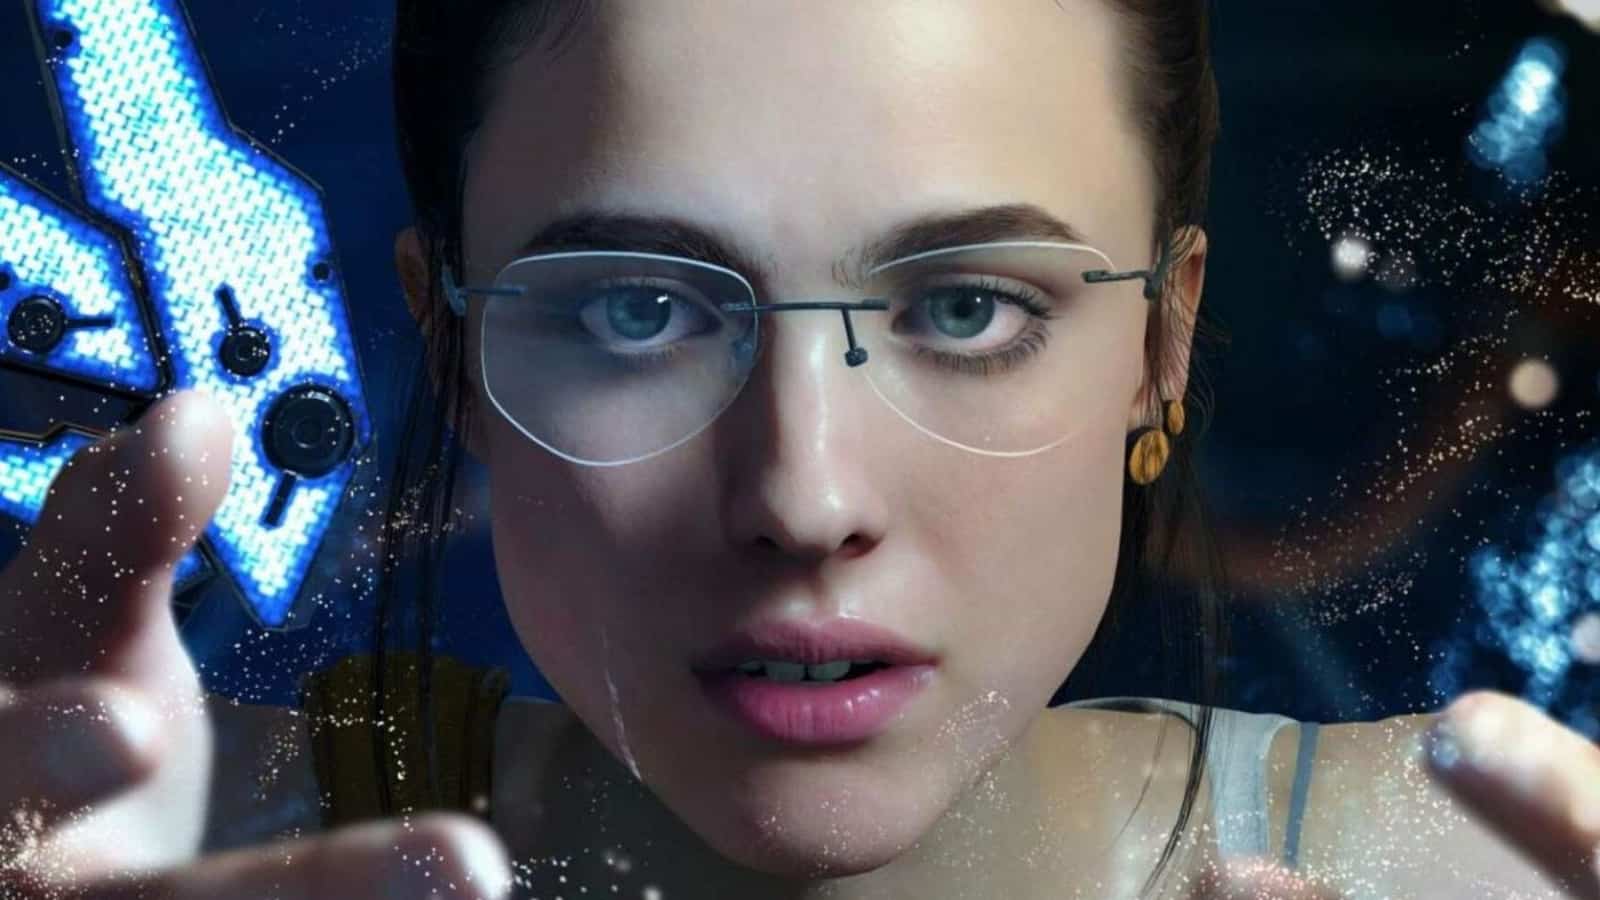 Margaret qualley as mama in death stranding